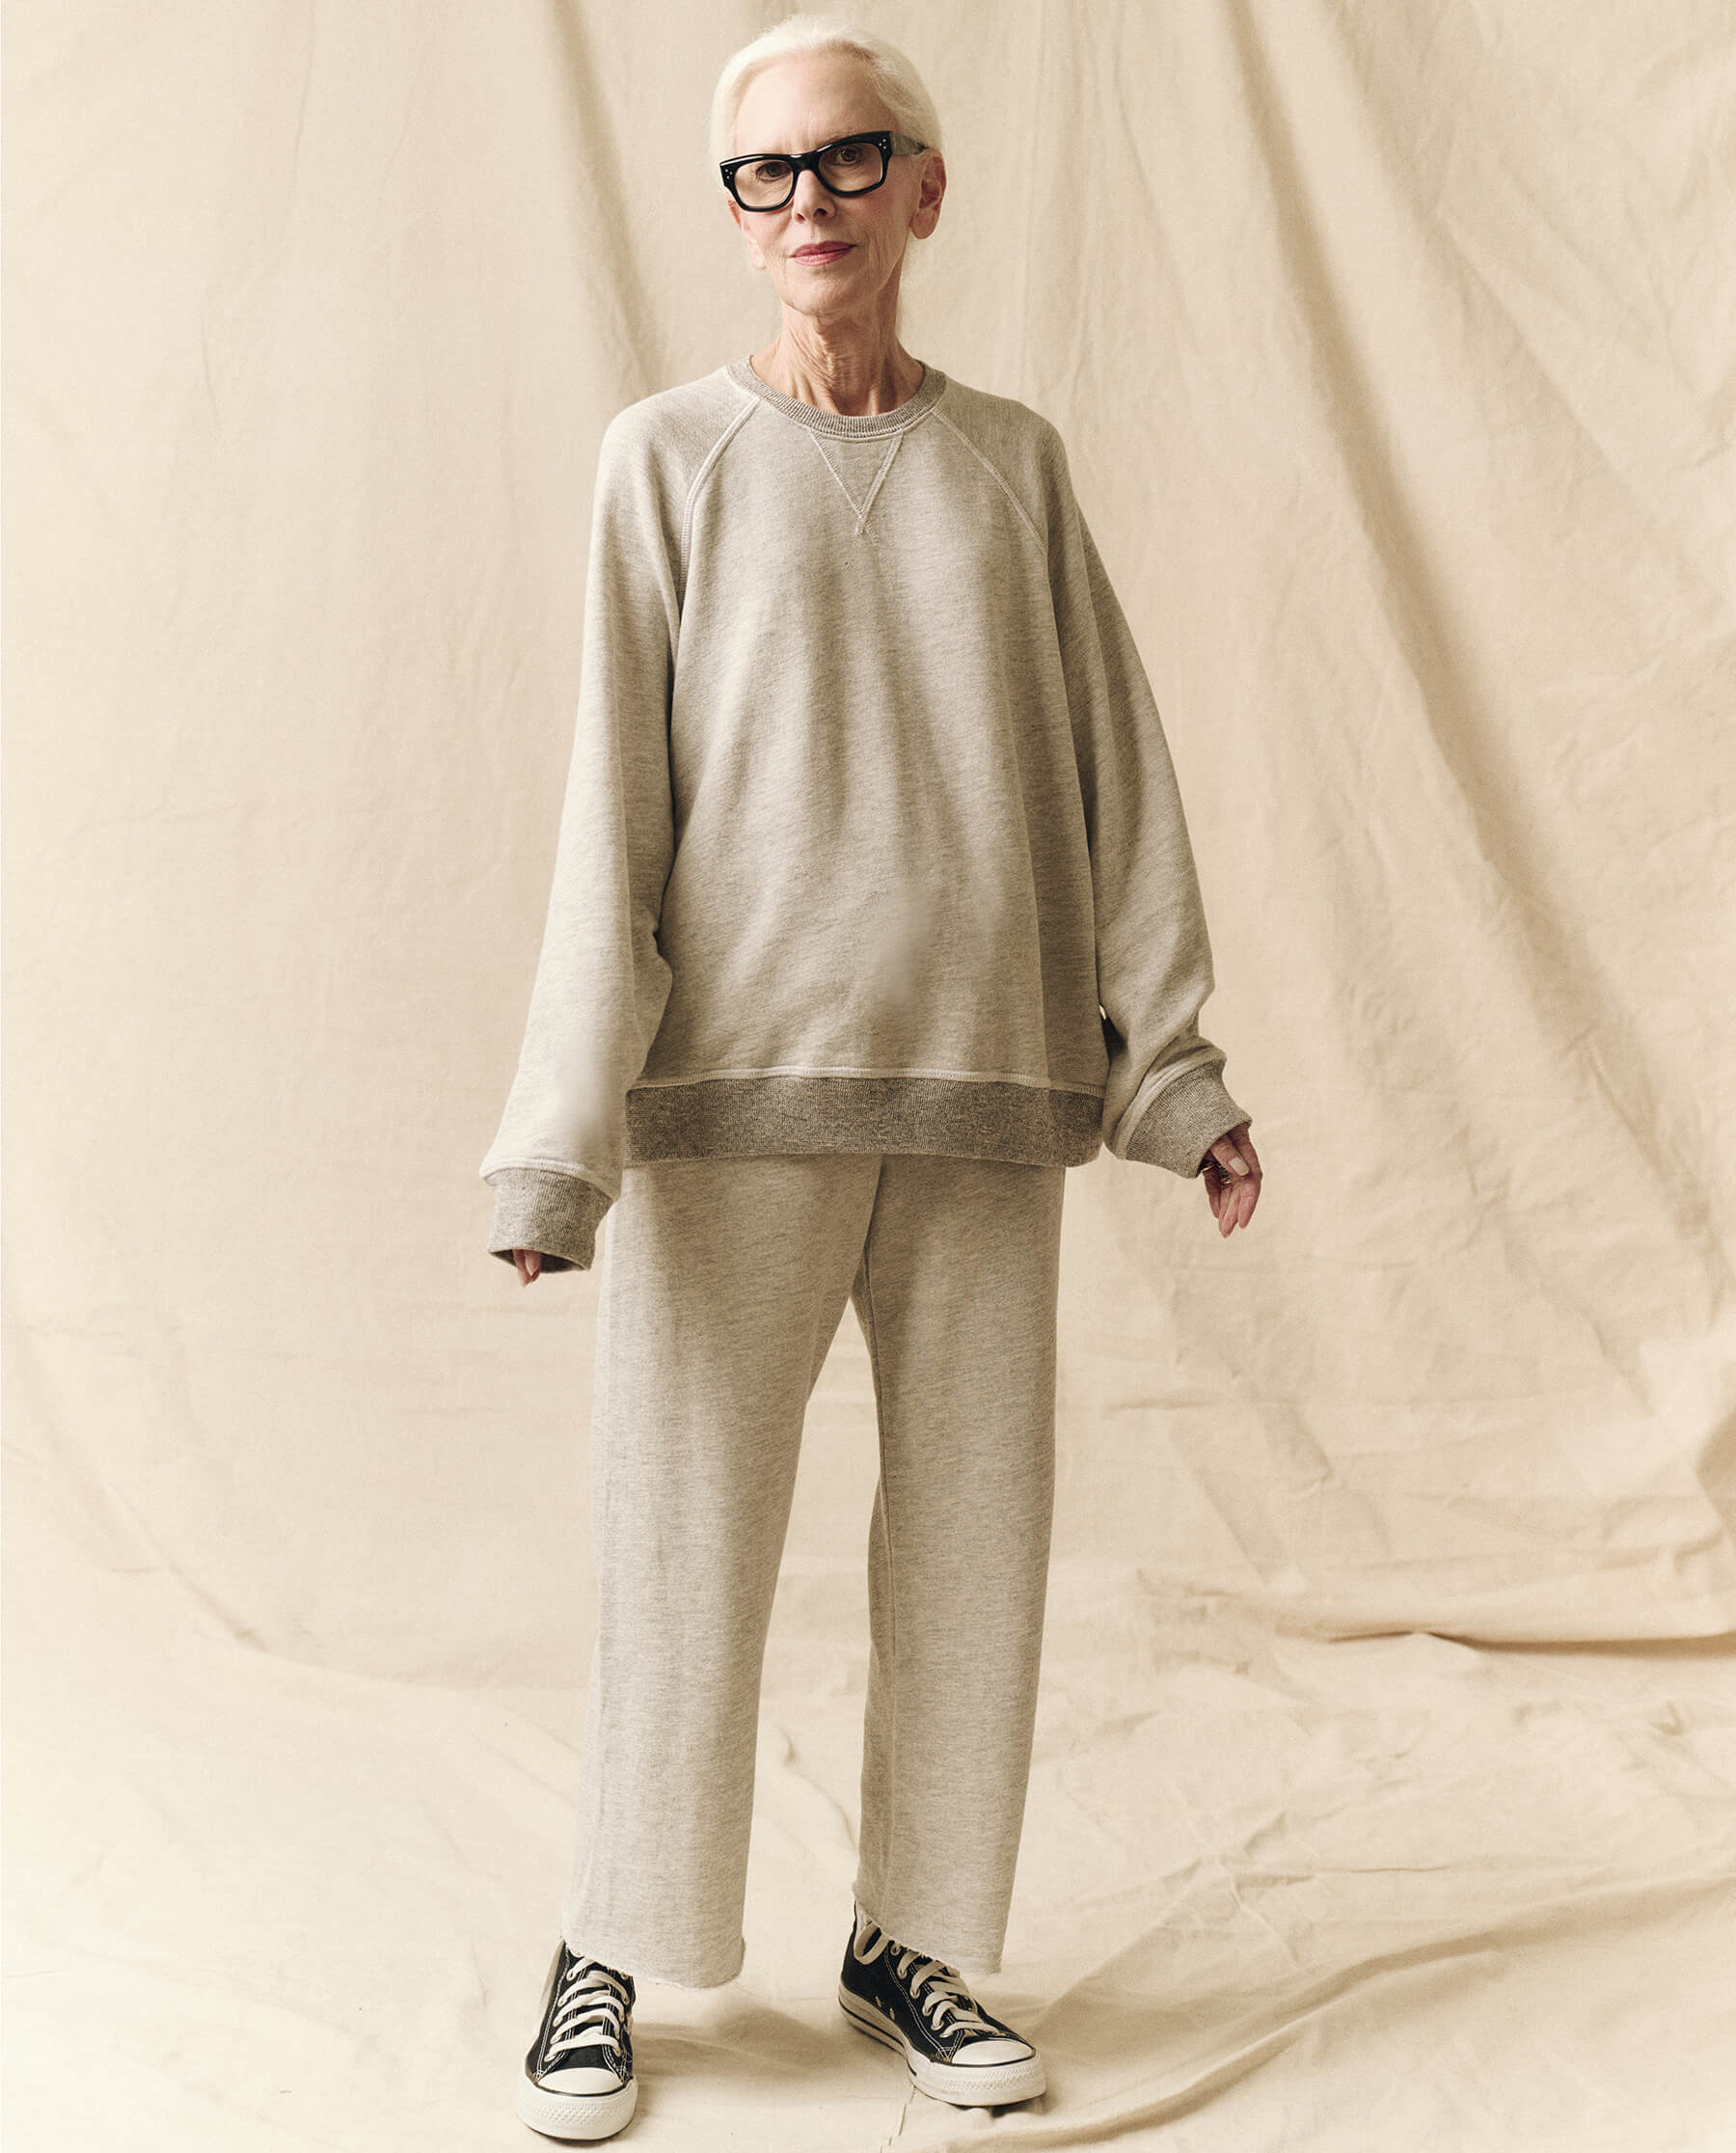 The Slouch Sweatshirt. Solid -- Soft Heather Grey SWEATSHIRTS THE GREAT. FALL 23 SOFT HEATHER GREY